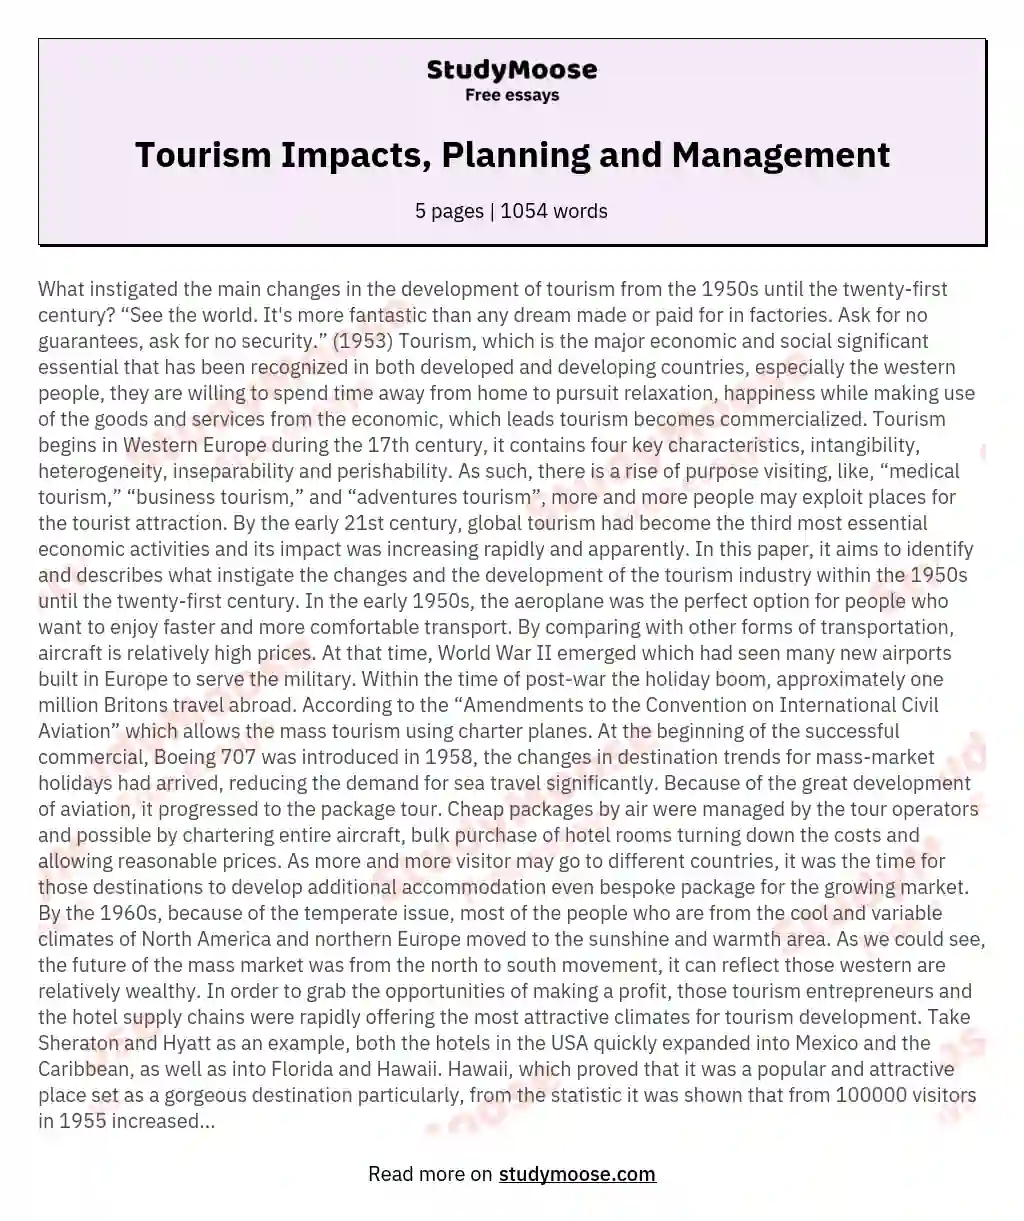 Tourism Impacts, Planning and Management essay